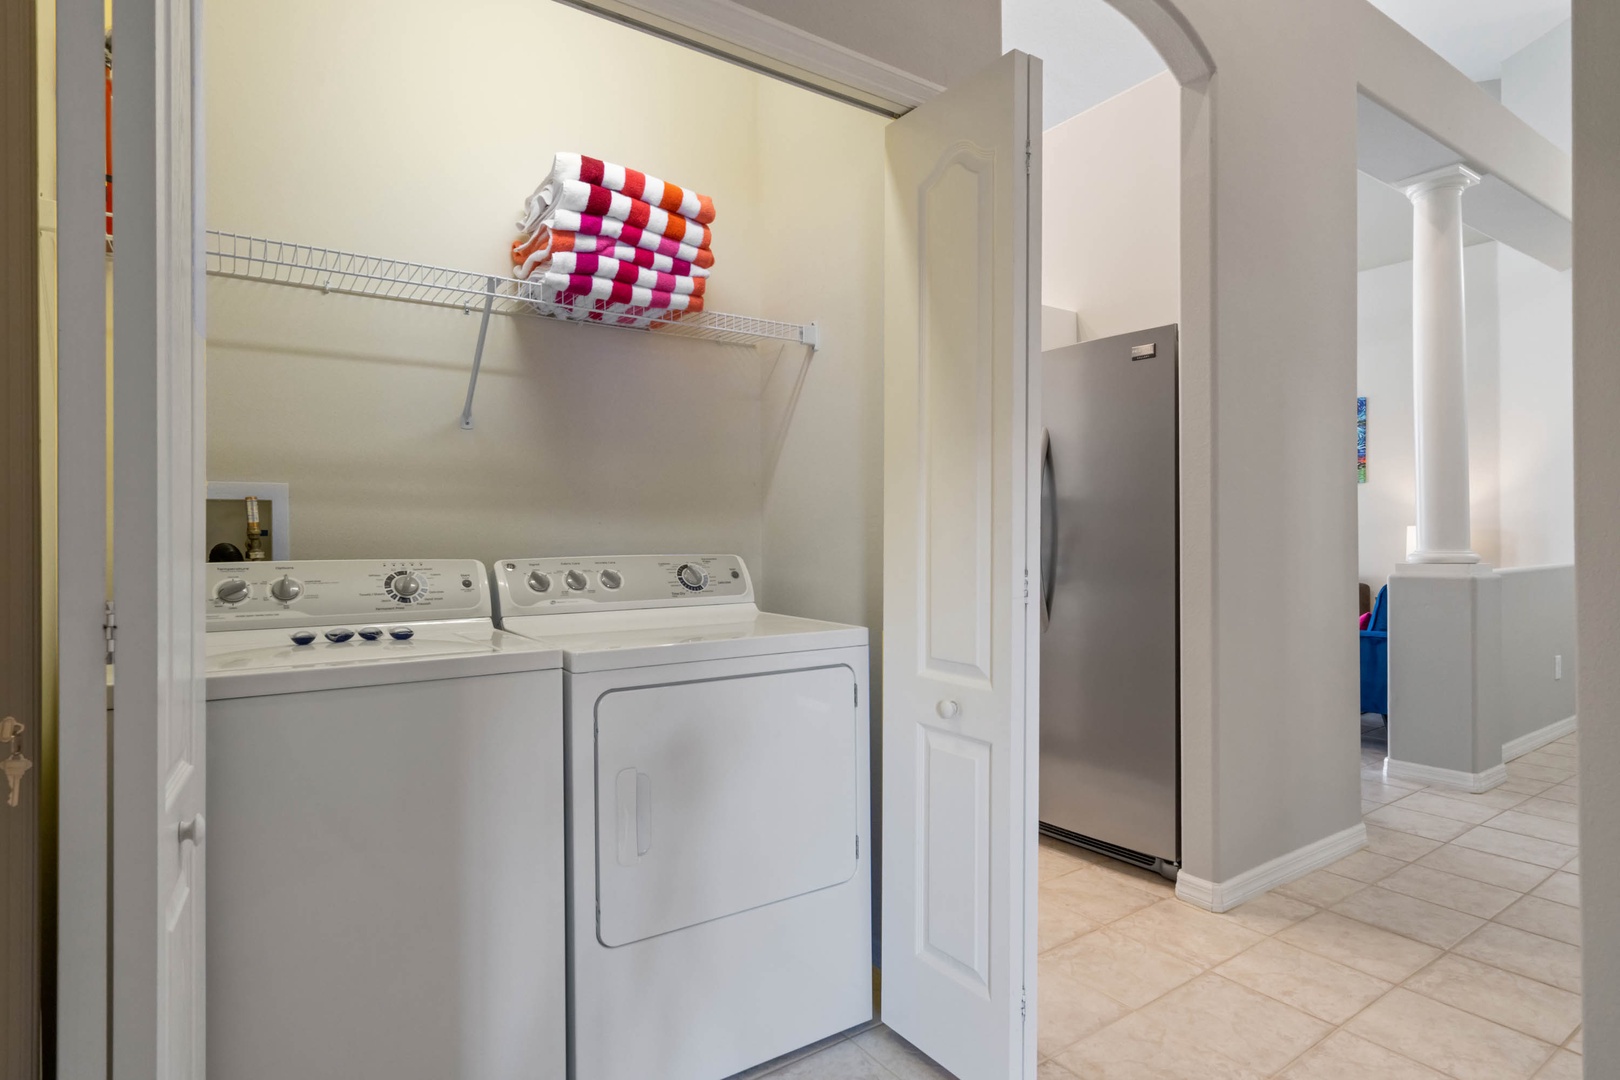 Enjoy the convenience of Private Laundry, tucked away in a hall closet